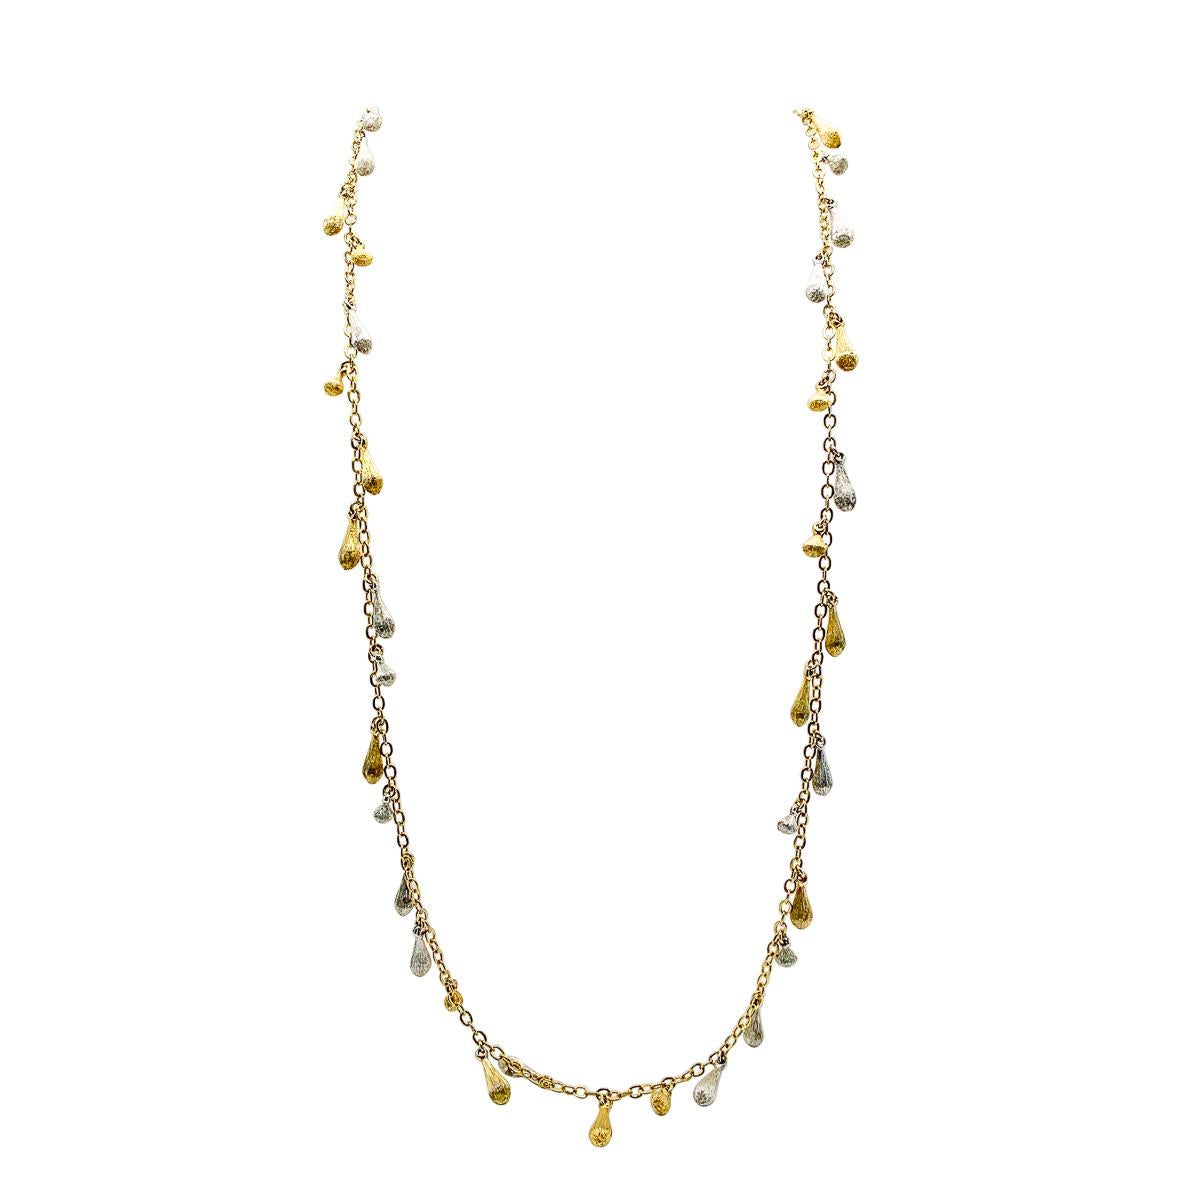 An exquisite modernist Vintage Dior Droplet Necklace. Featuring a gold plated chain adorned with a variety of sizes of delicate textured droplets, each one beautifully fashioned and weighty. Varying droplet sizes remind us of the attention to detail